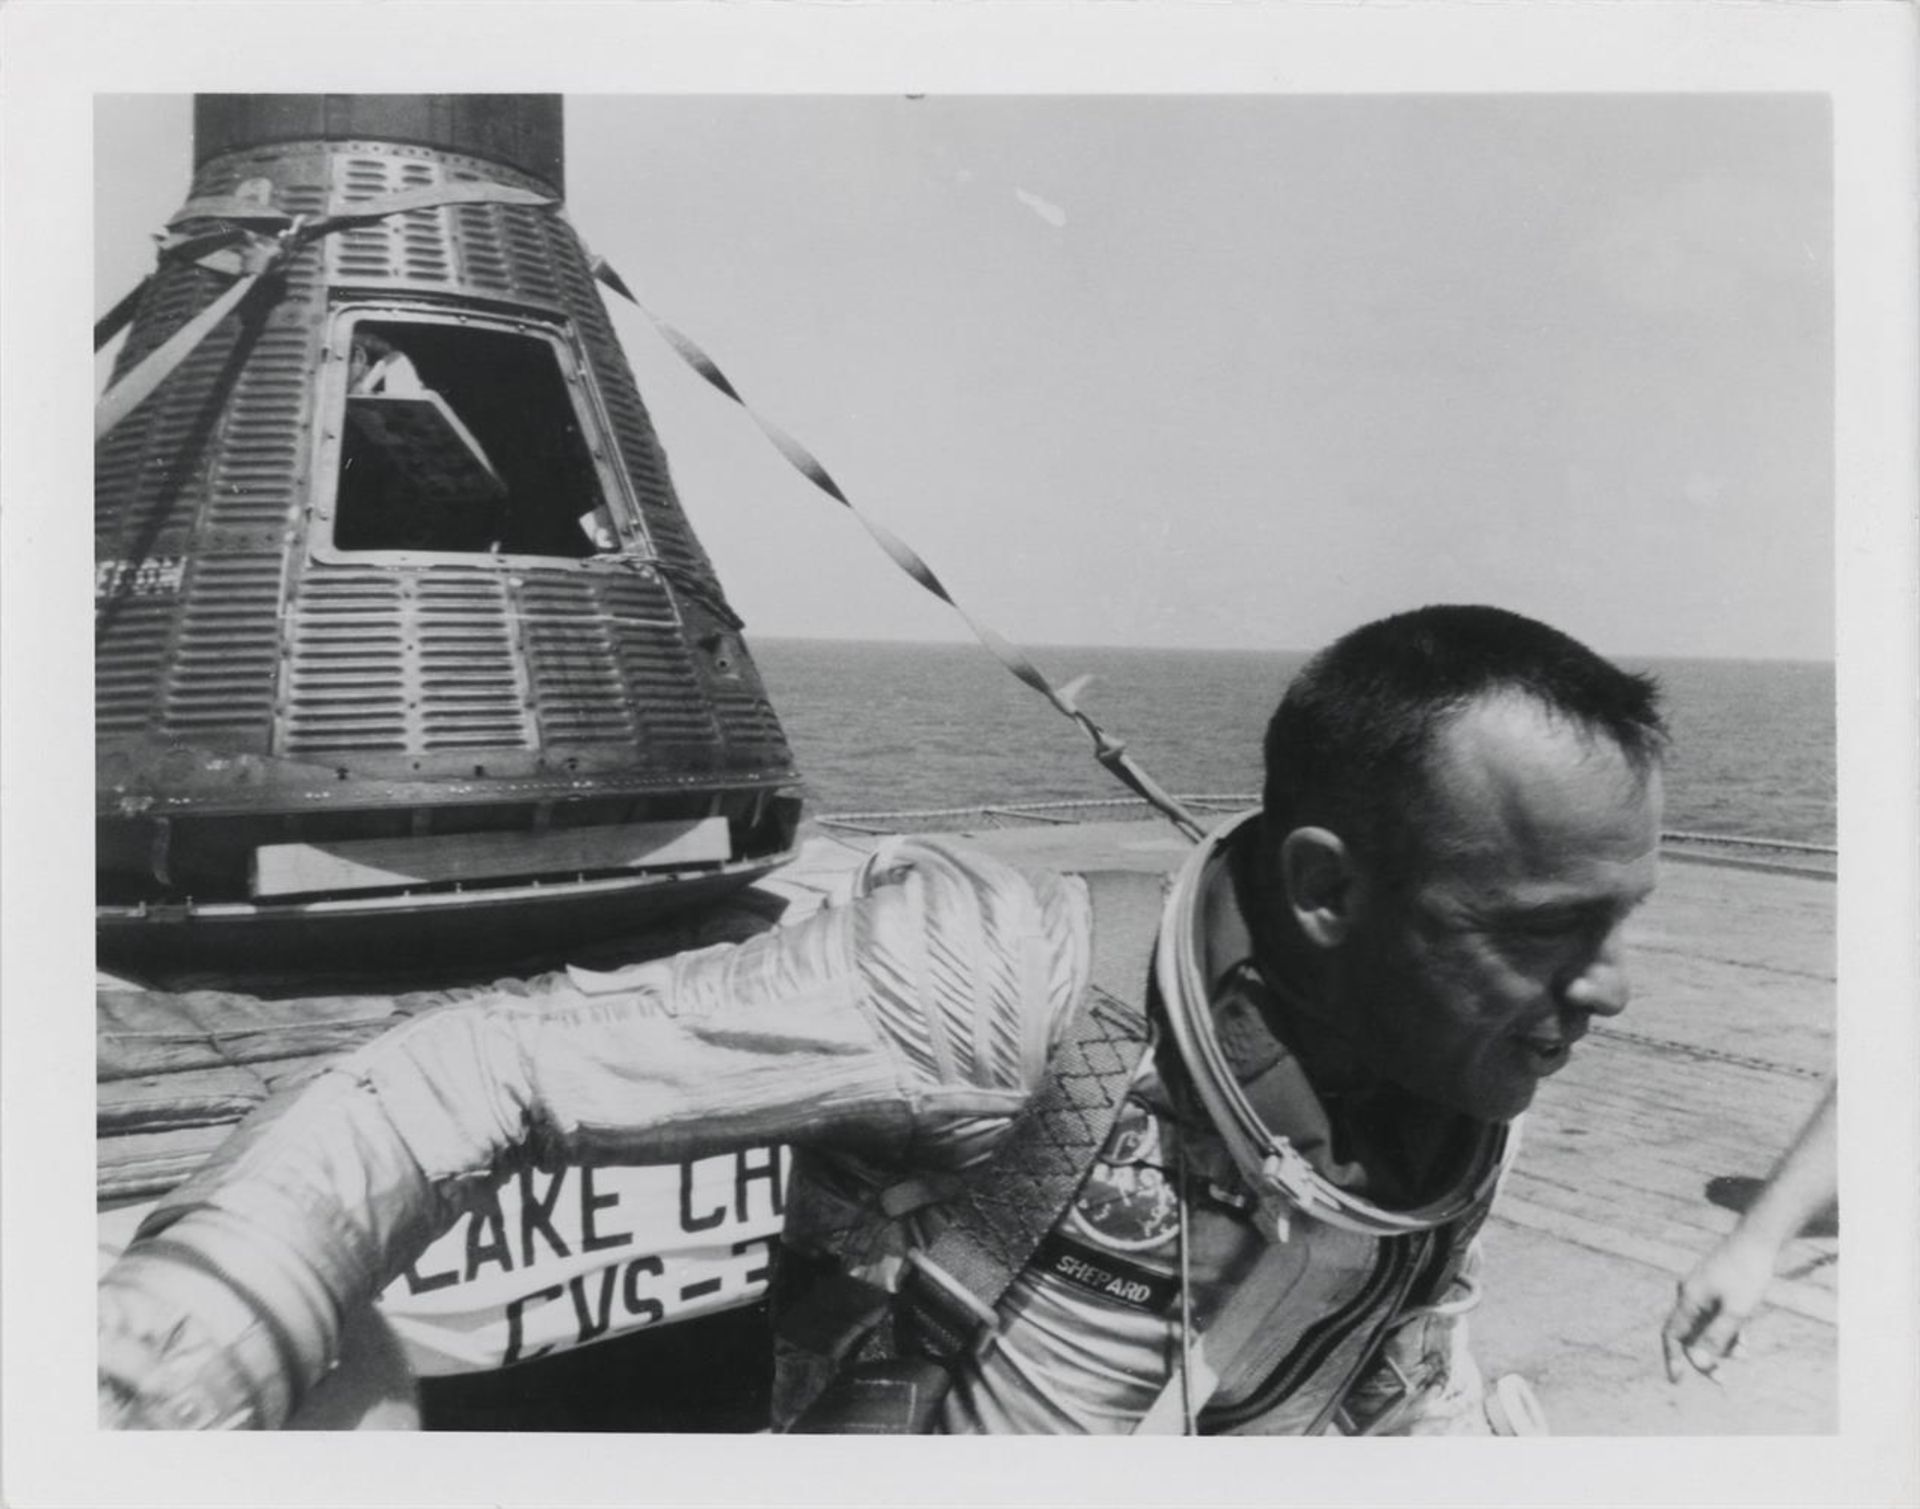 The recovery of the first American in space, Alan Shepard (2 views), Mercury Redstone 3, 5 May 1961 - Image 4 of 5